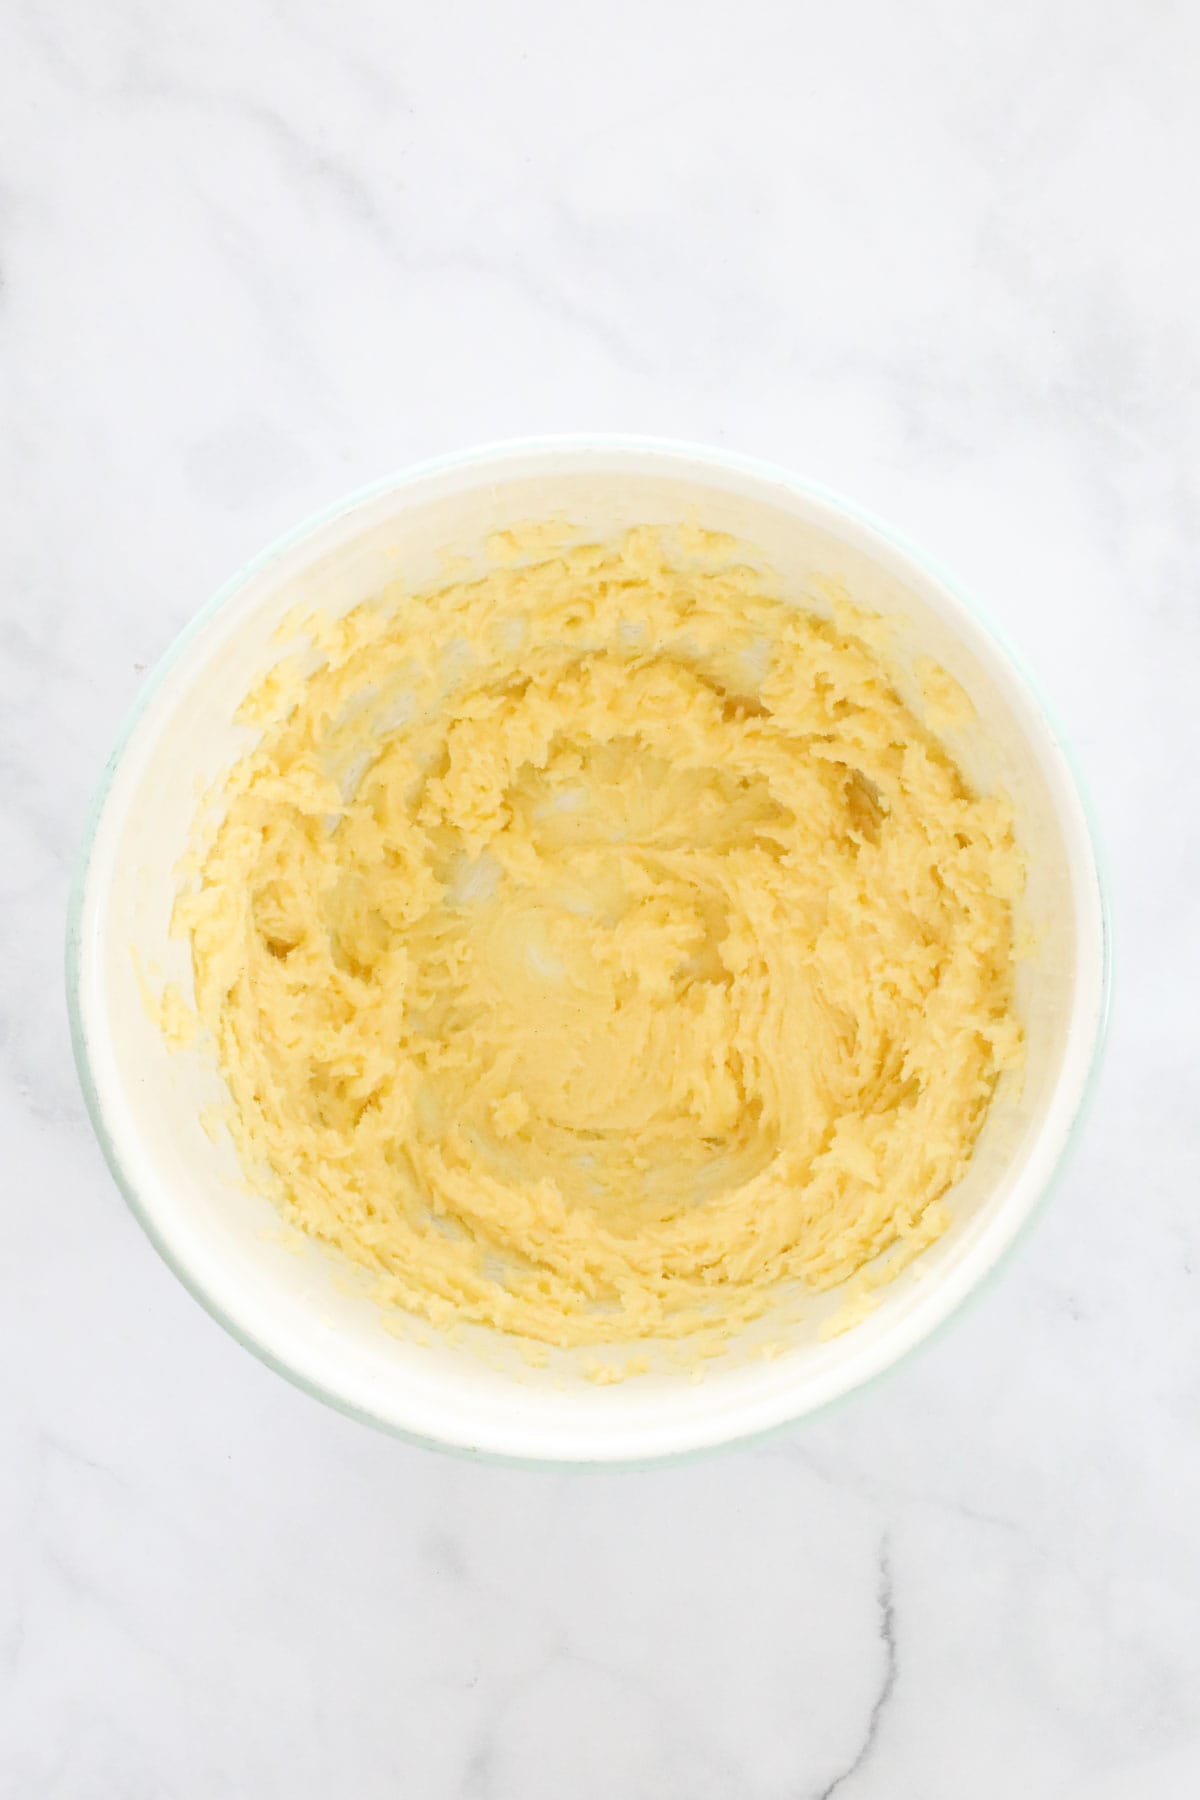 Creamed butter, sugar and vanilla bean paste in a mixing bowl.